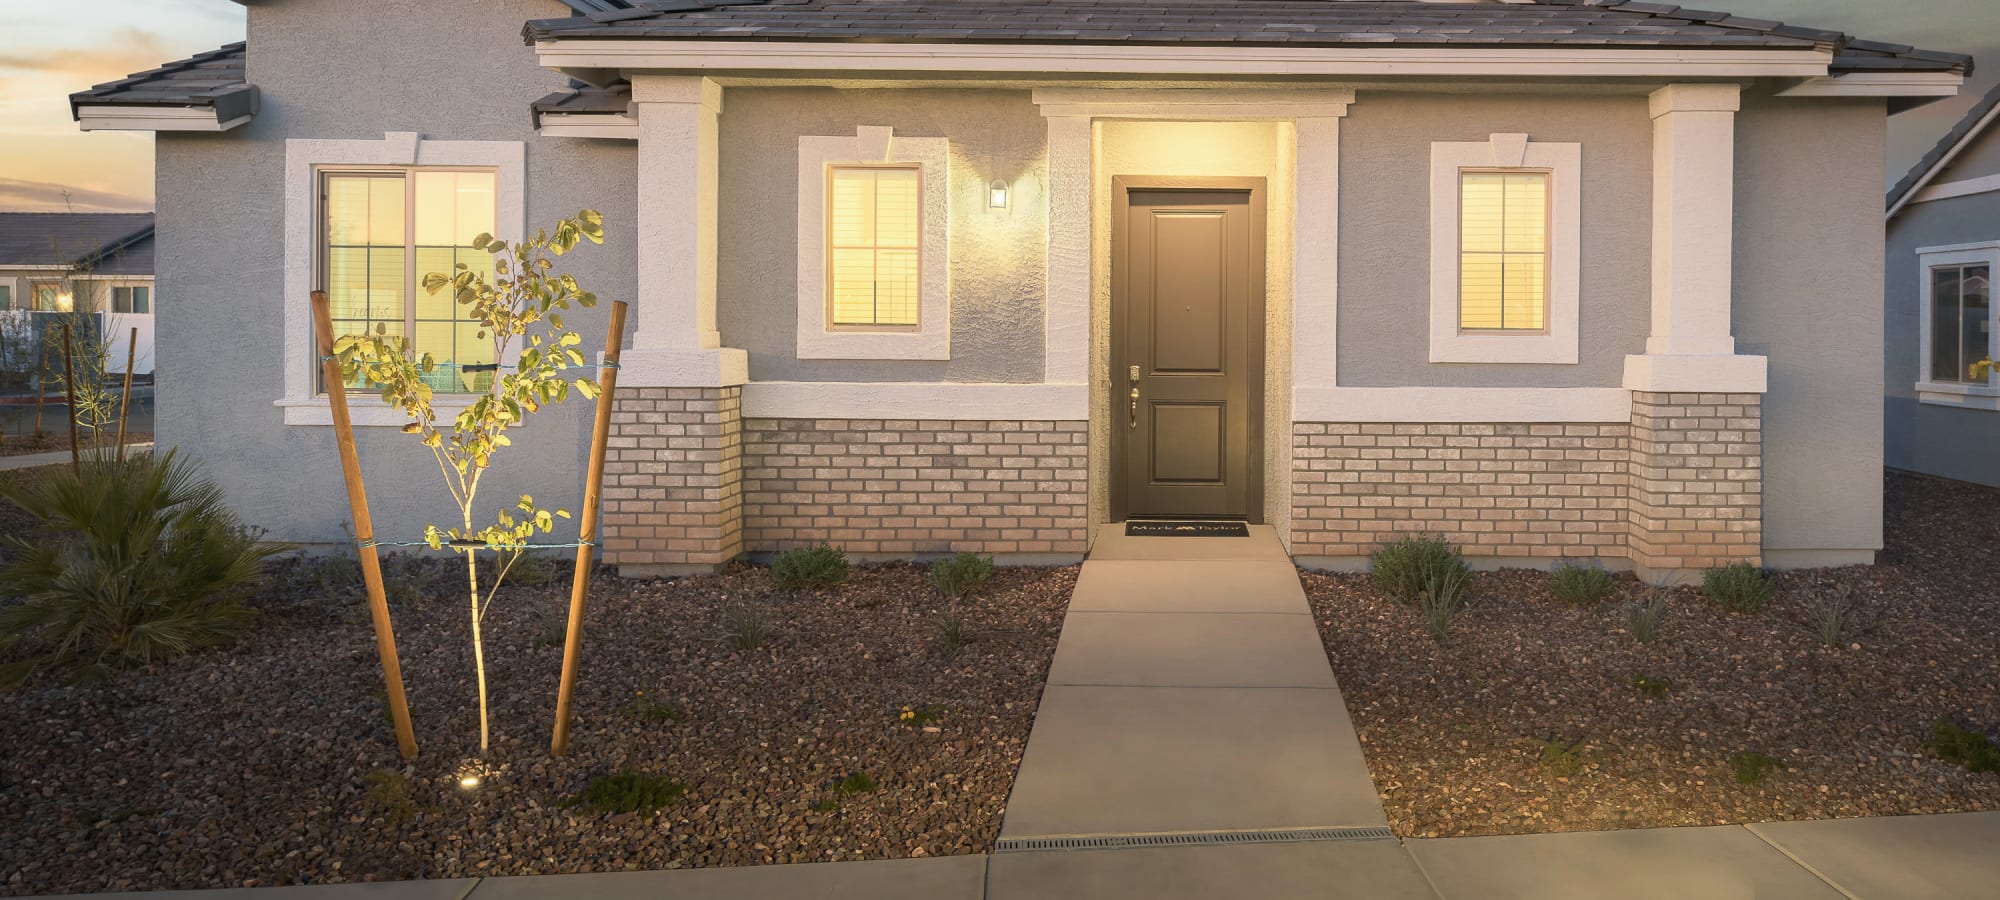 Detached homes at TerraLane at Canyon Trails South in Goodyear, Arizona